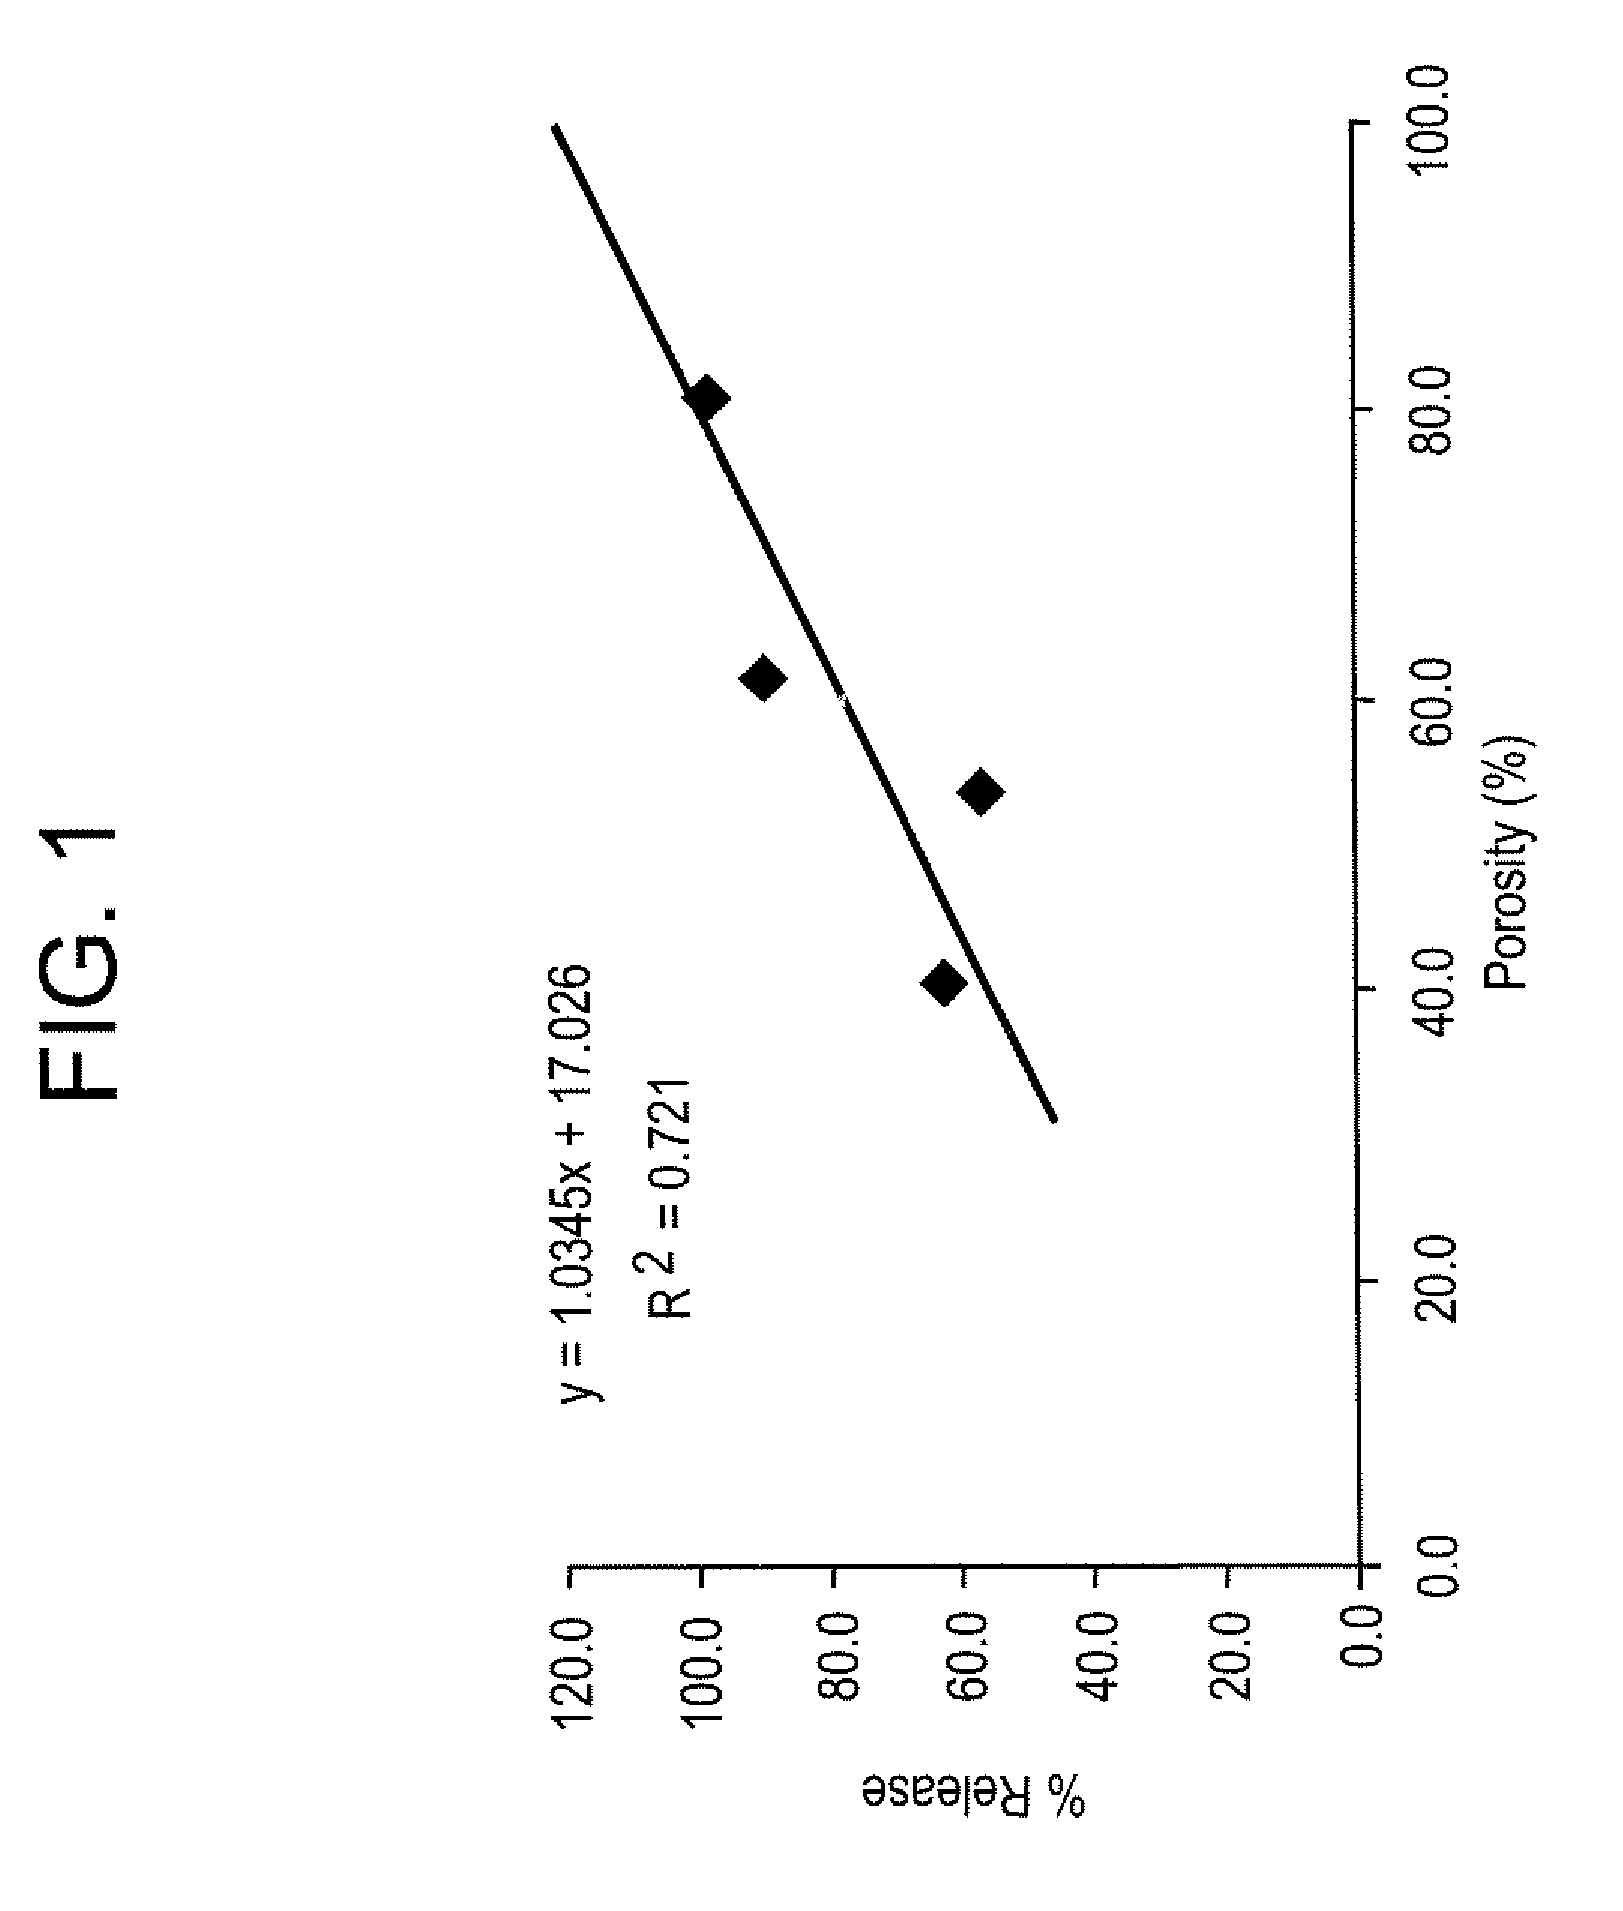 Methods for making and using particulate pharmaceutical formulations for sustained release